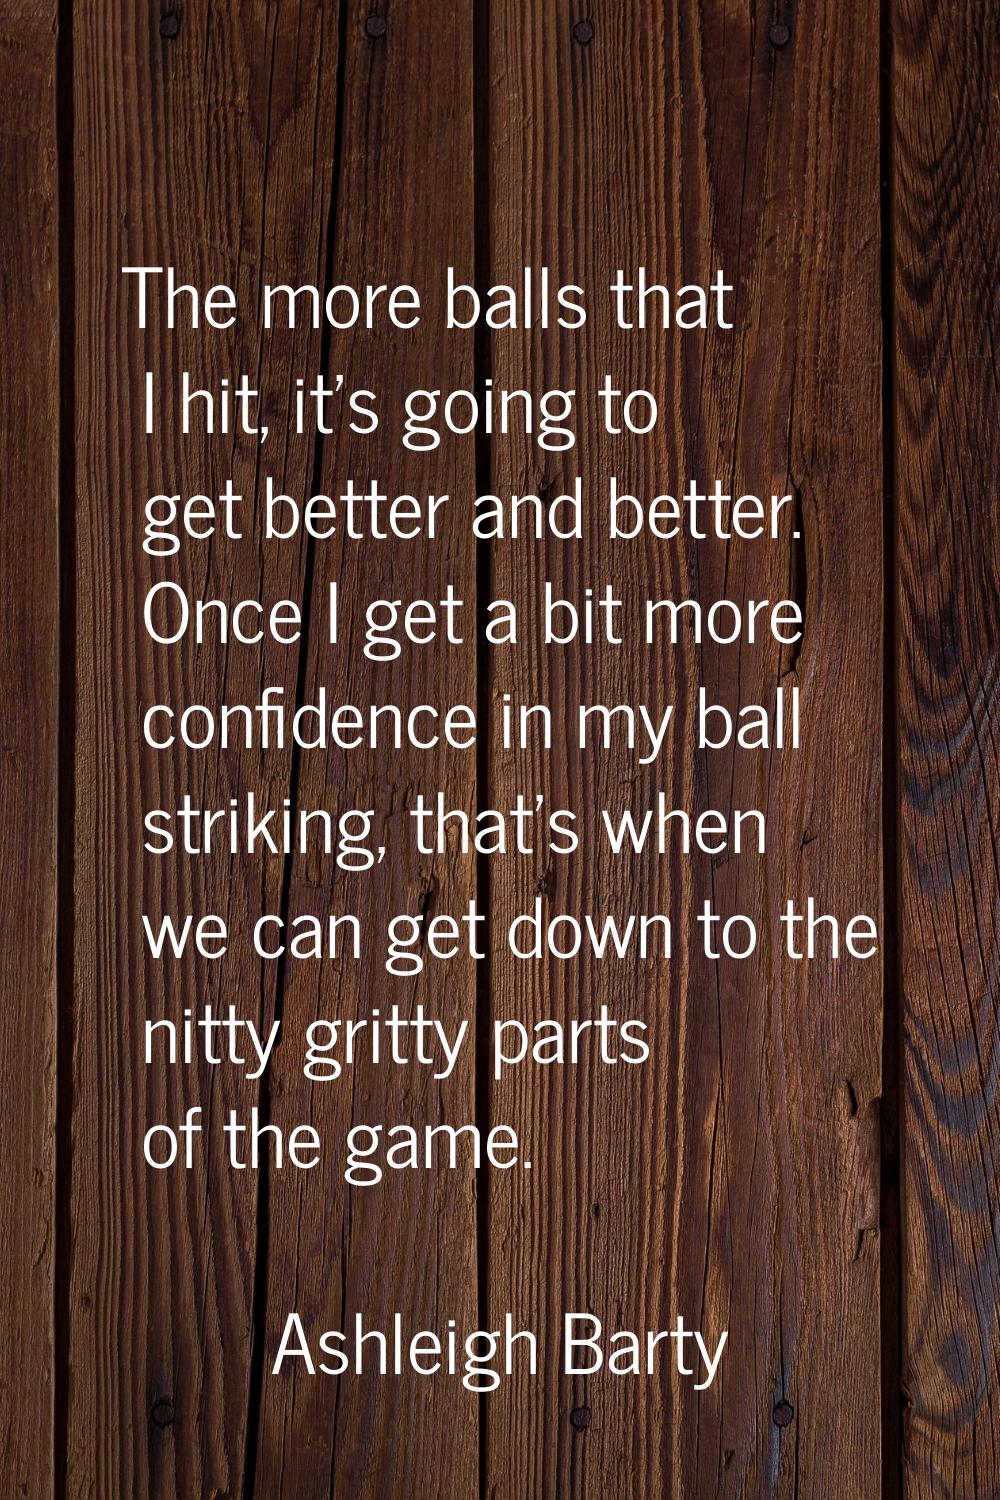 The more balls that I hit, it's going to get better and better. Once I get a bit more confidence in